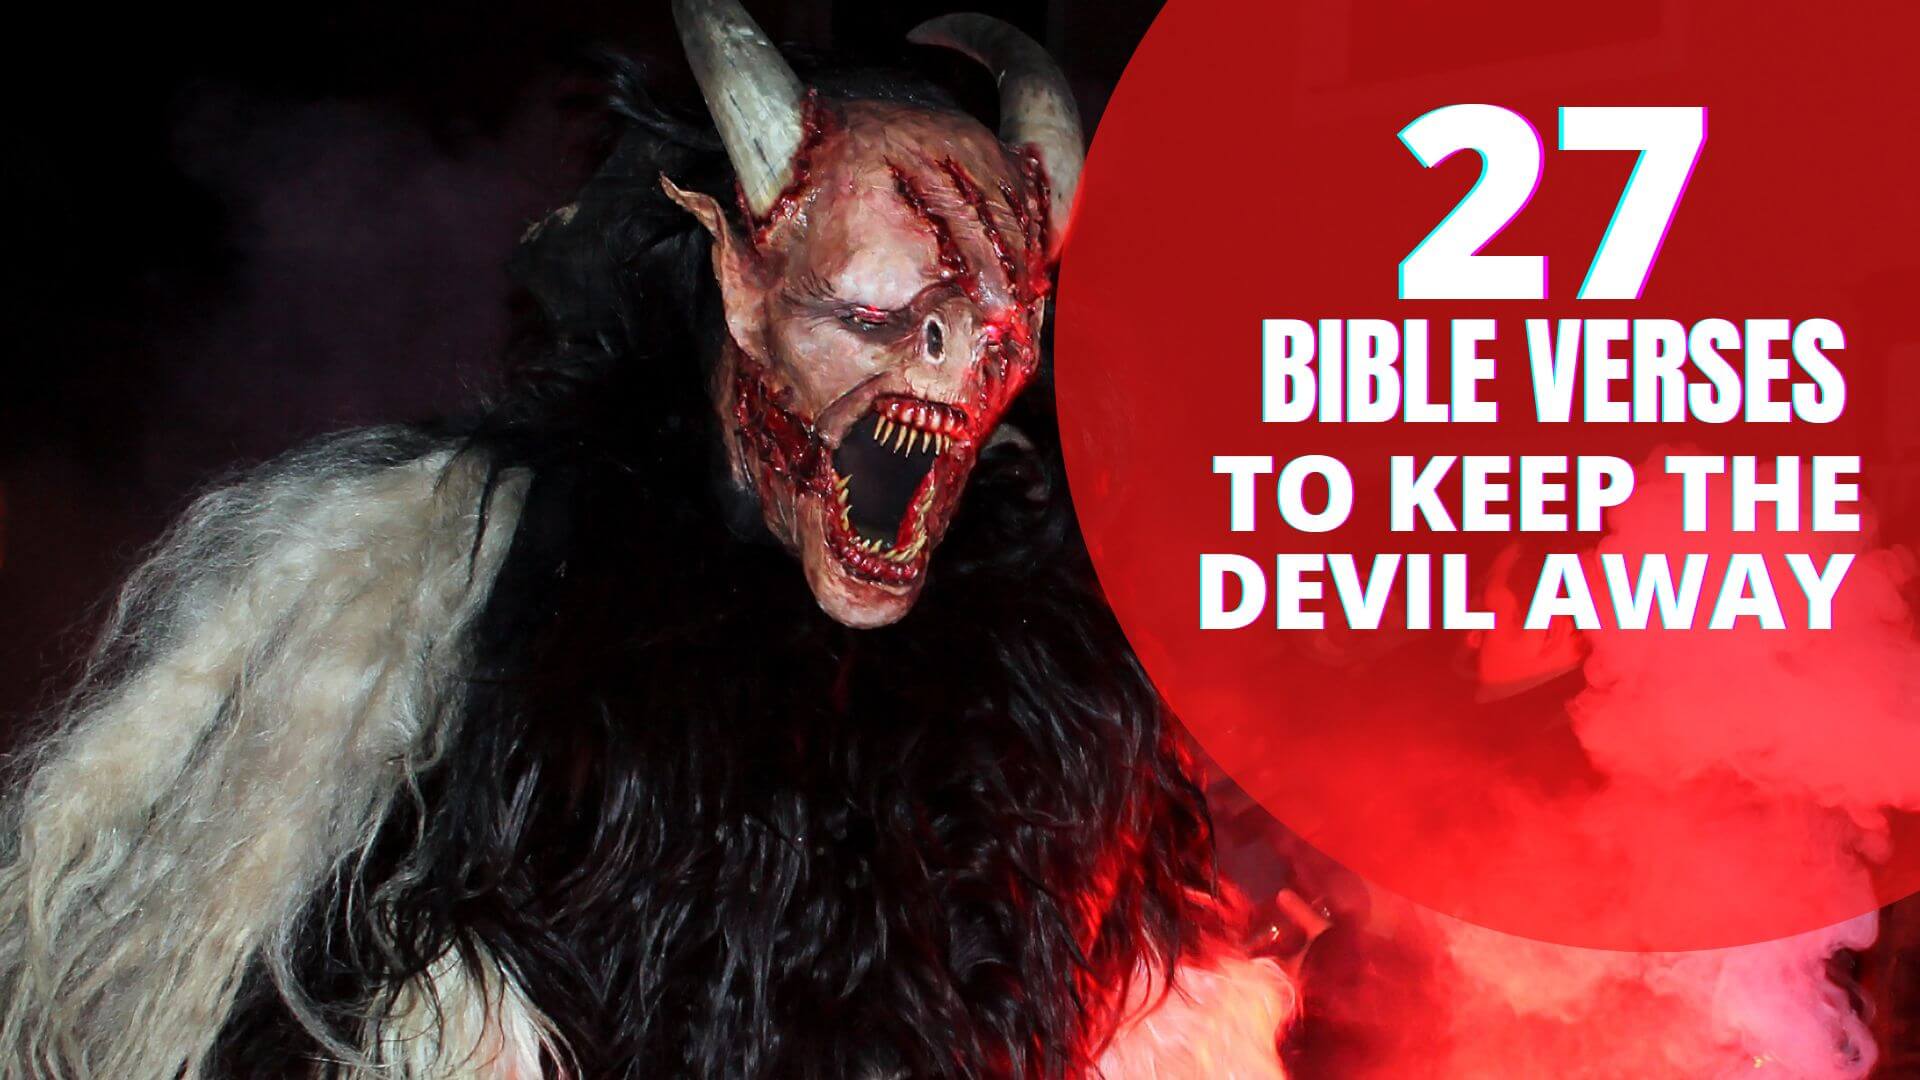 Bible verses to keep the devil away